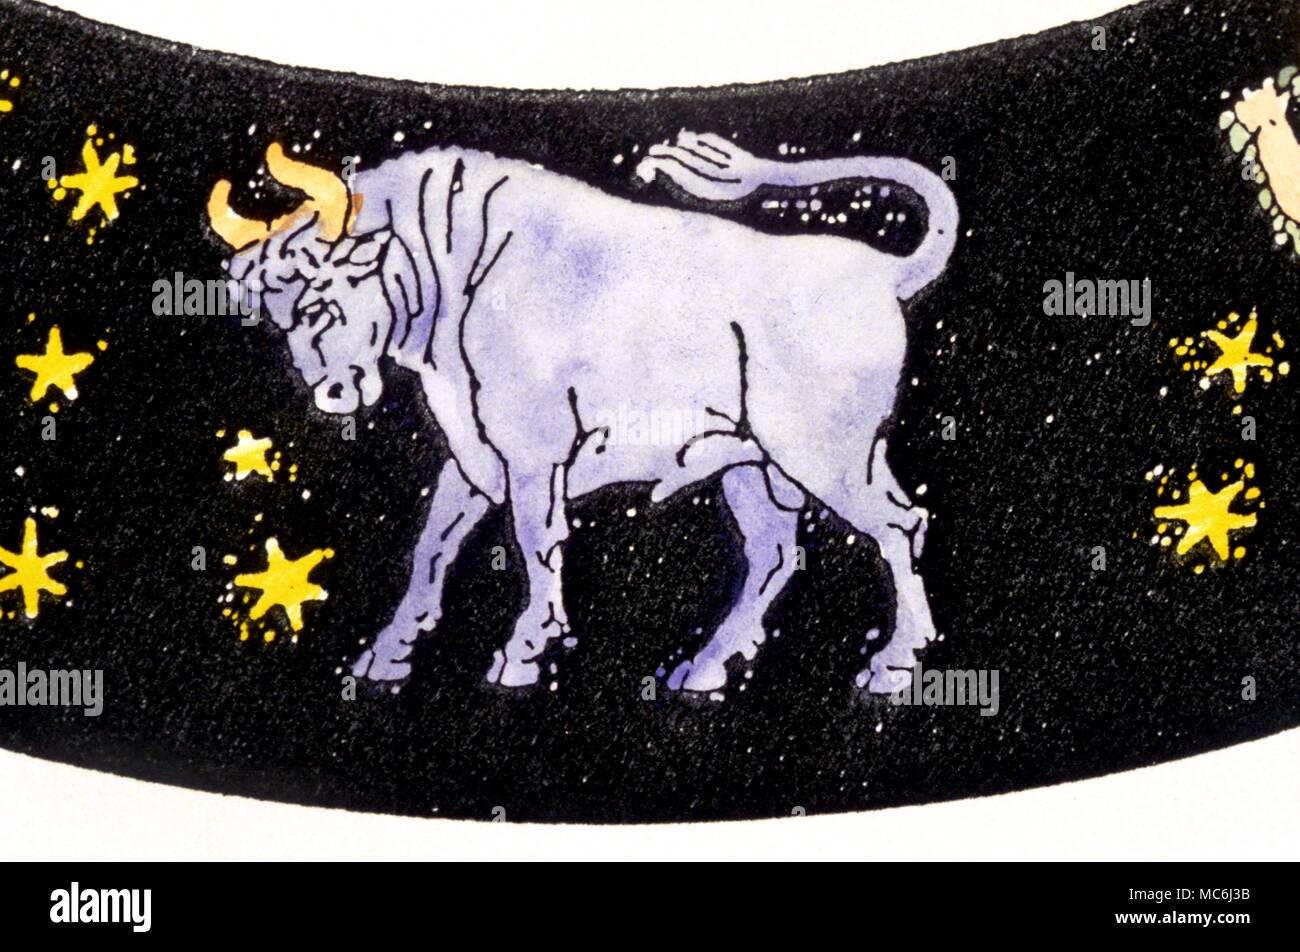 Myths Zodiacal Taurus Image of Taurus the Bull from a late 19th century textbook Stock Photo